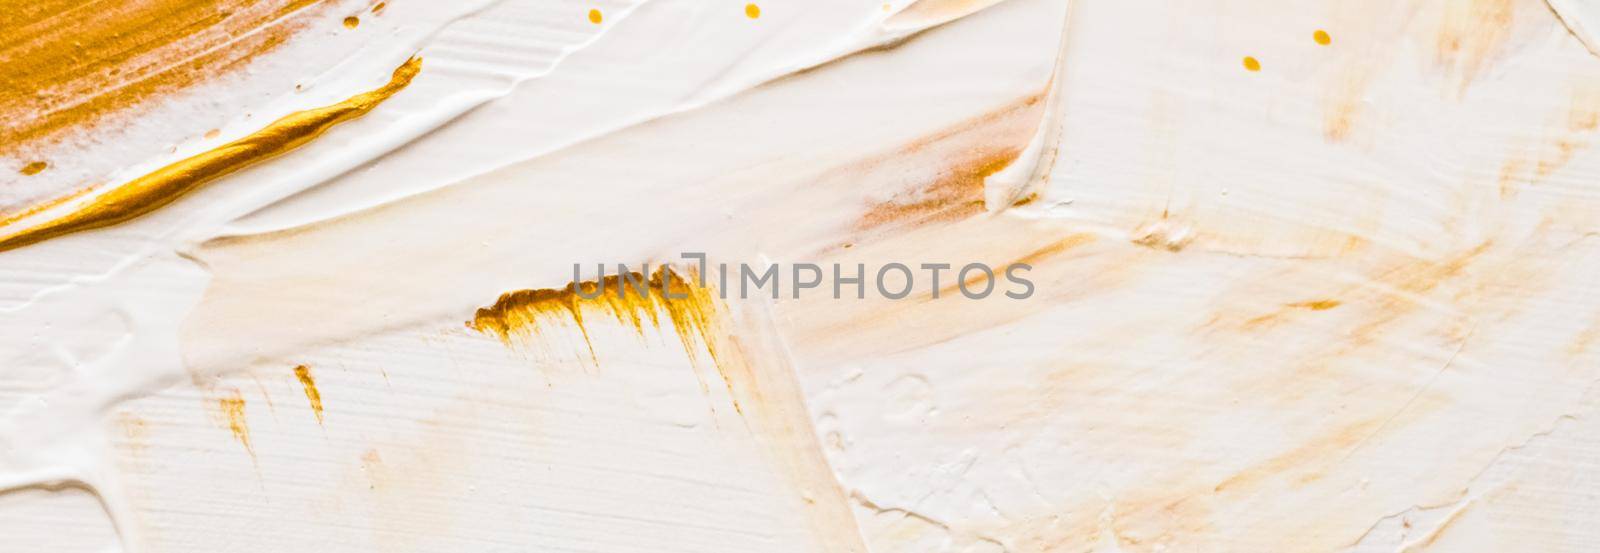 Art, branding and glamour concept - Artistic abstract texture background, golden acrylic paint brush stroke, textured ink oil splash as print backdrop for luxury holiday brand, flatlay banner design